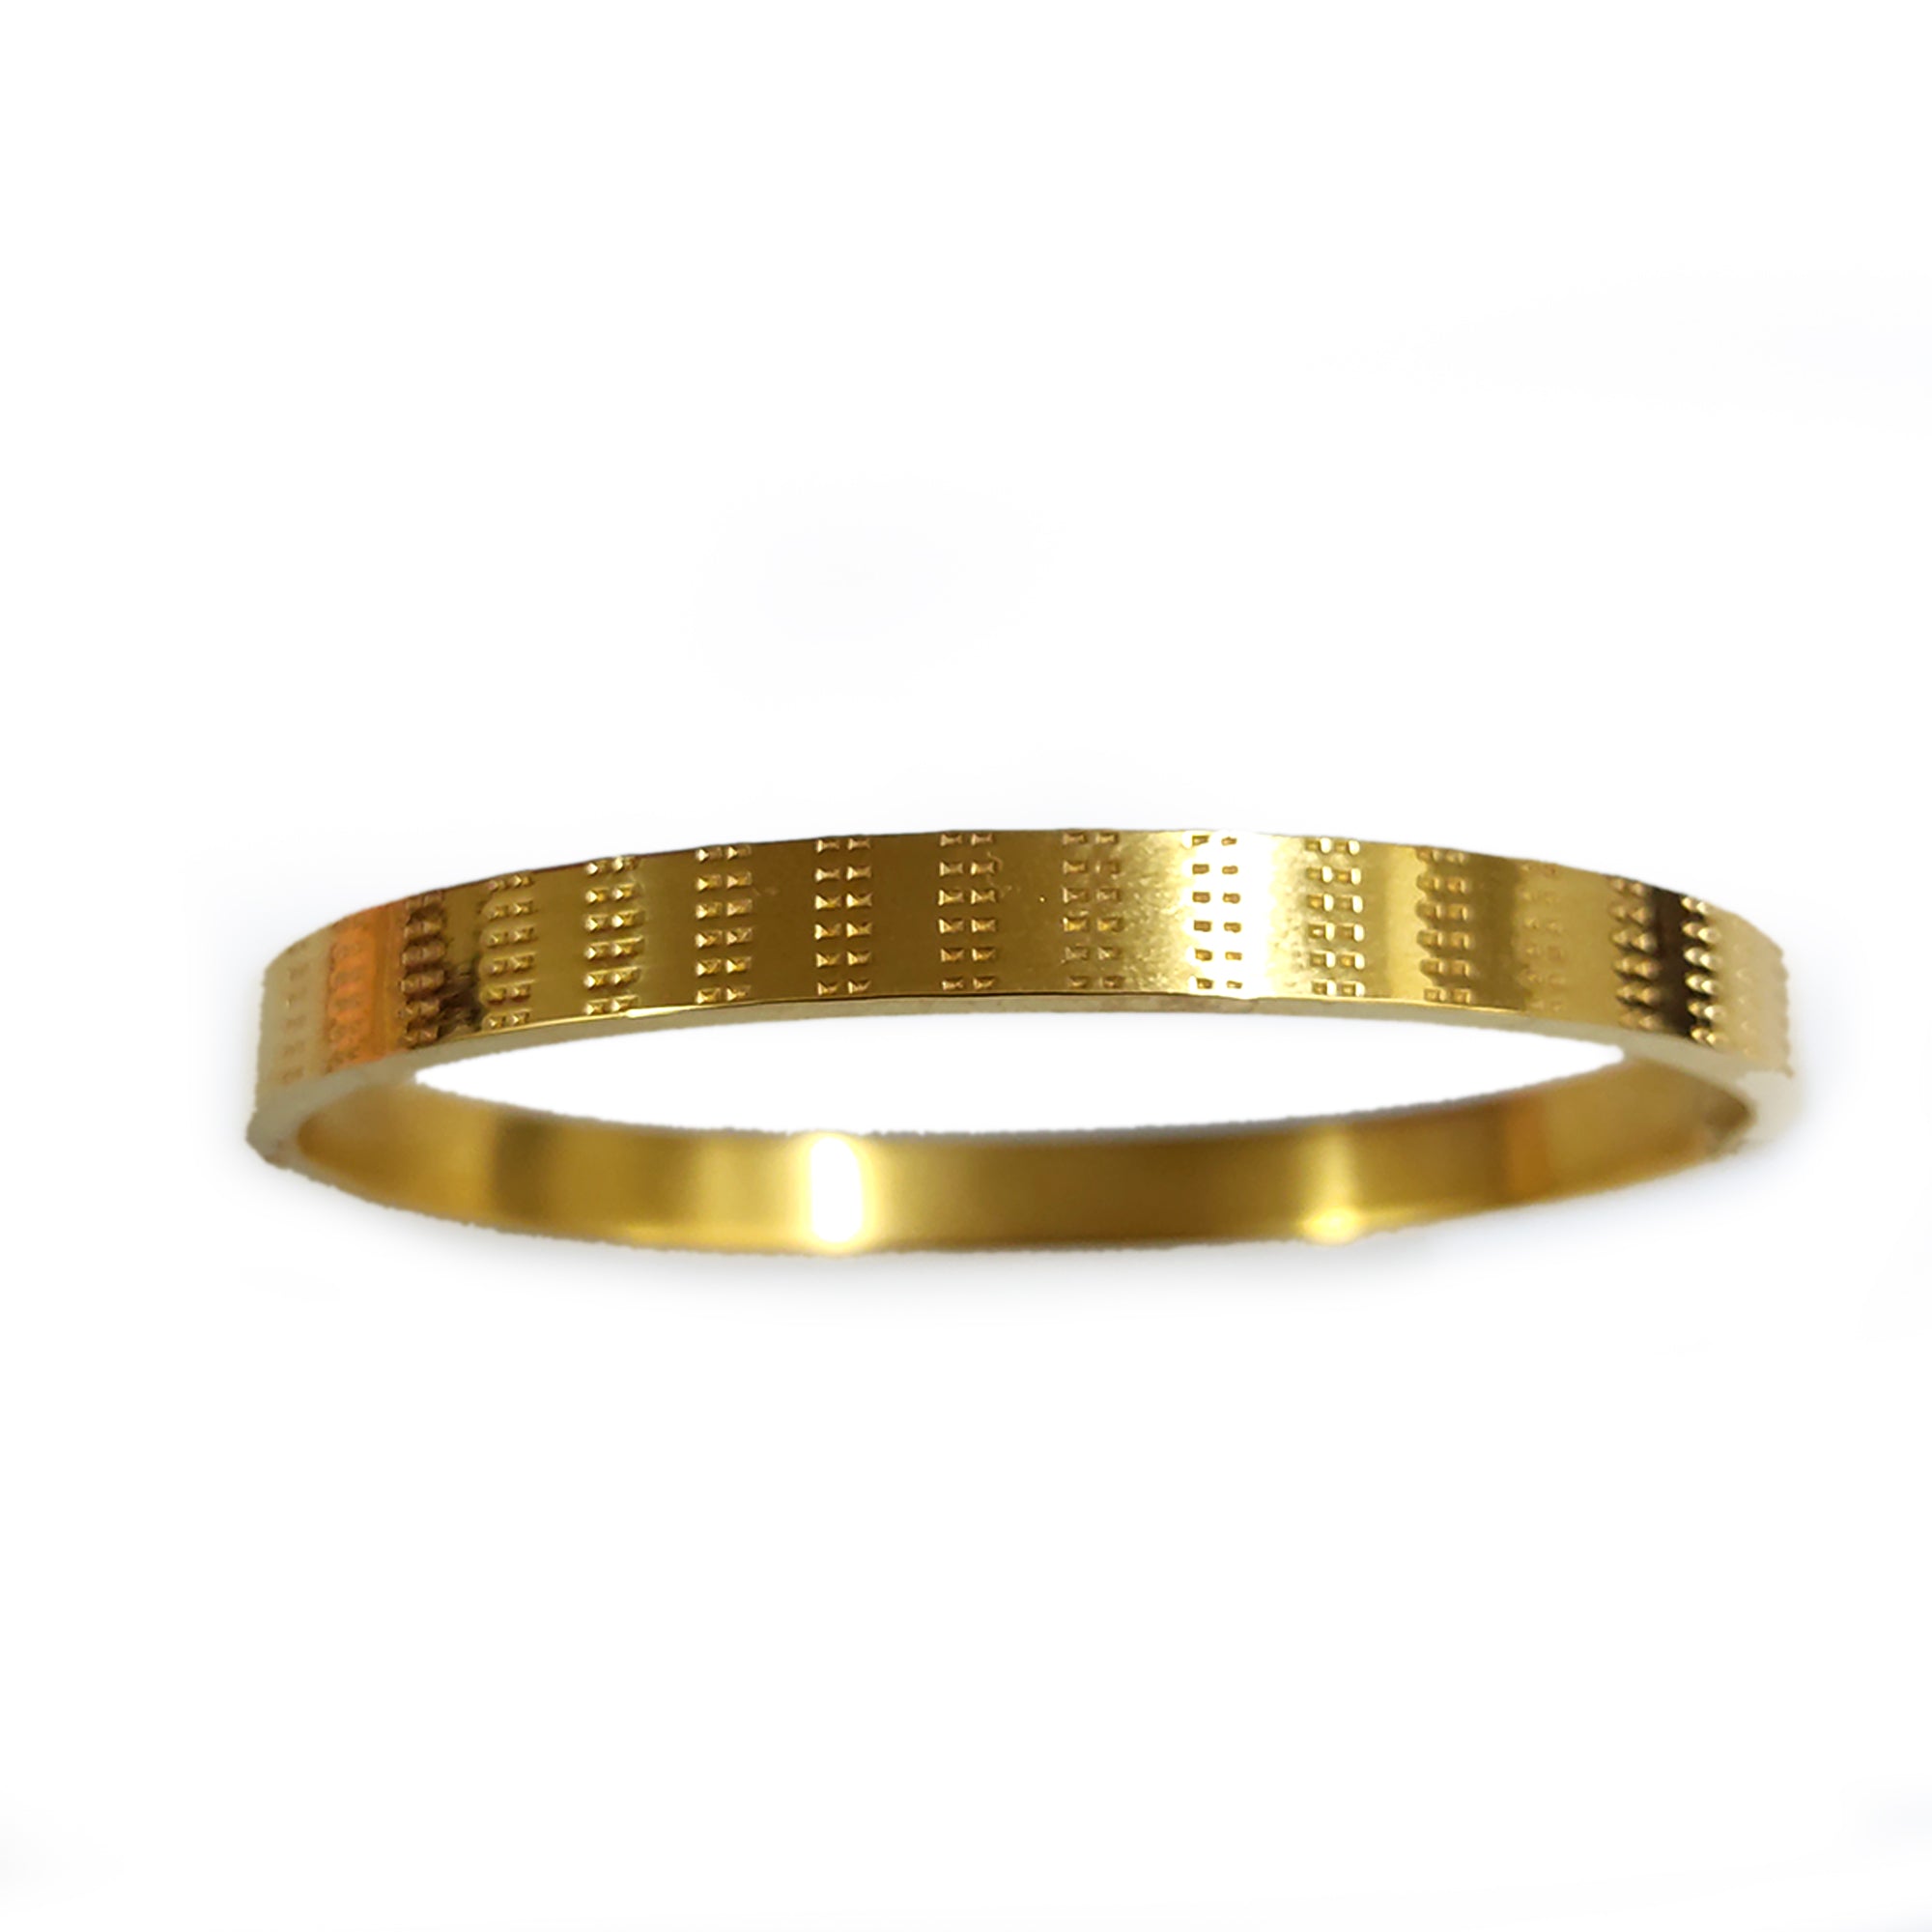 Buy Daily Wear Simple Bangles Online from Vaibhav Jewellers